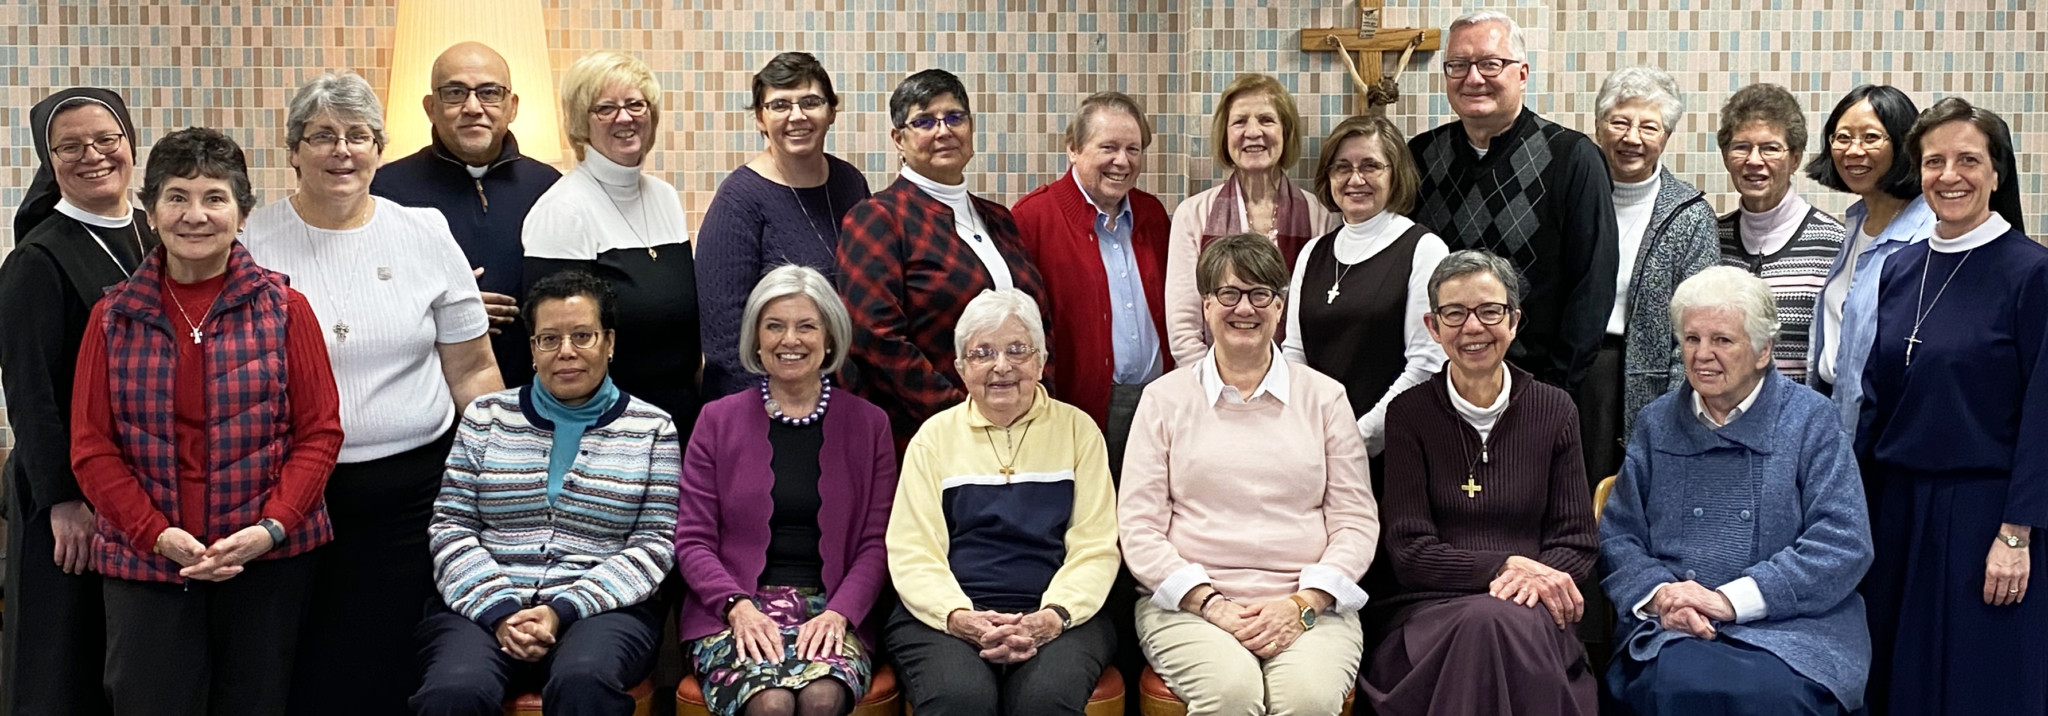 NRVC Delaware Valley Member Area Holds Winter Meeting Missionary